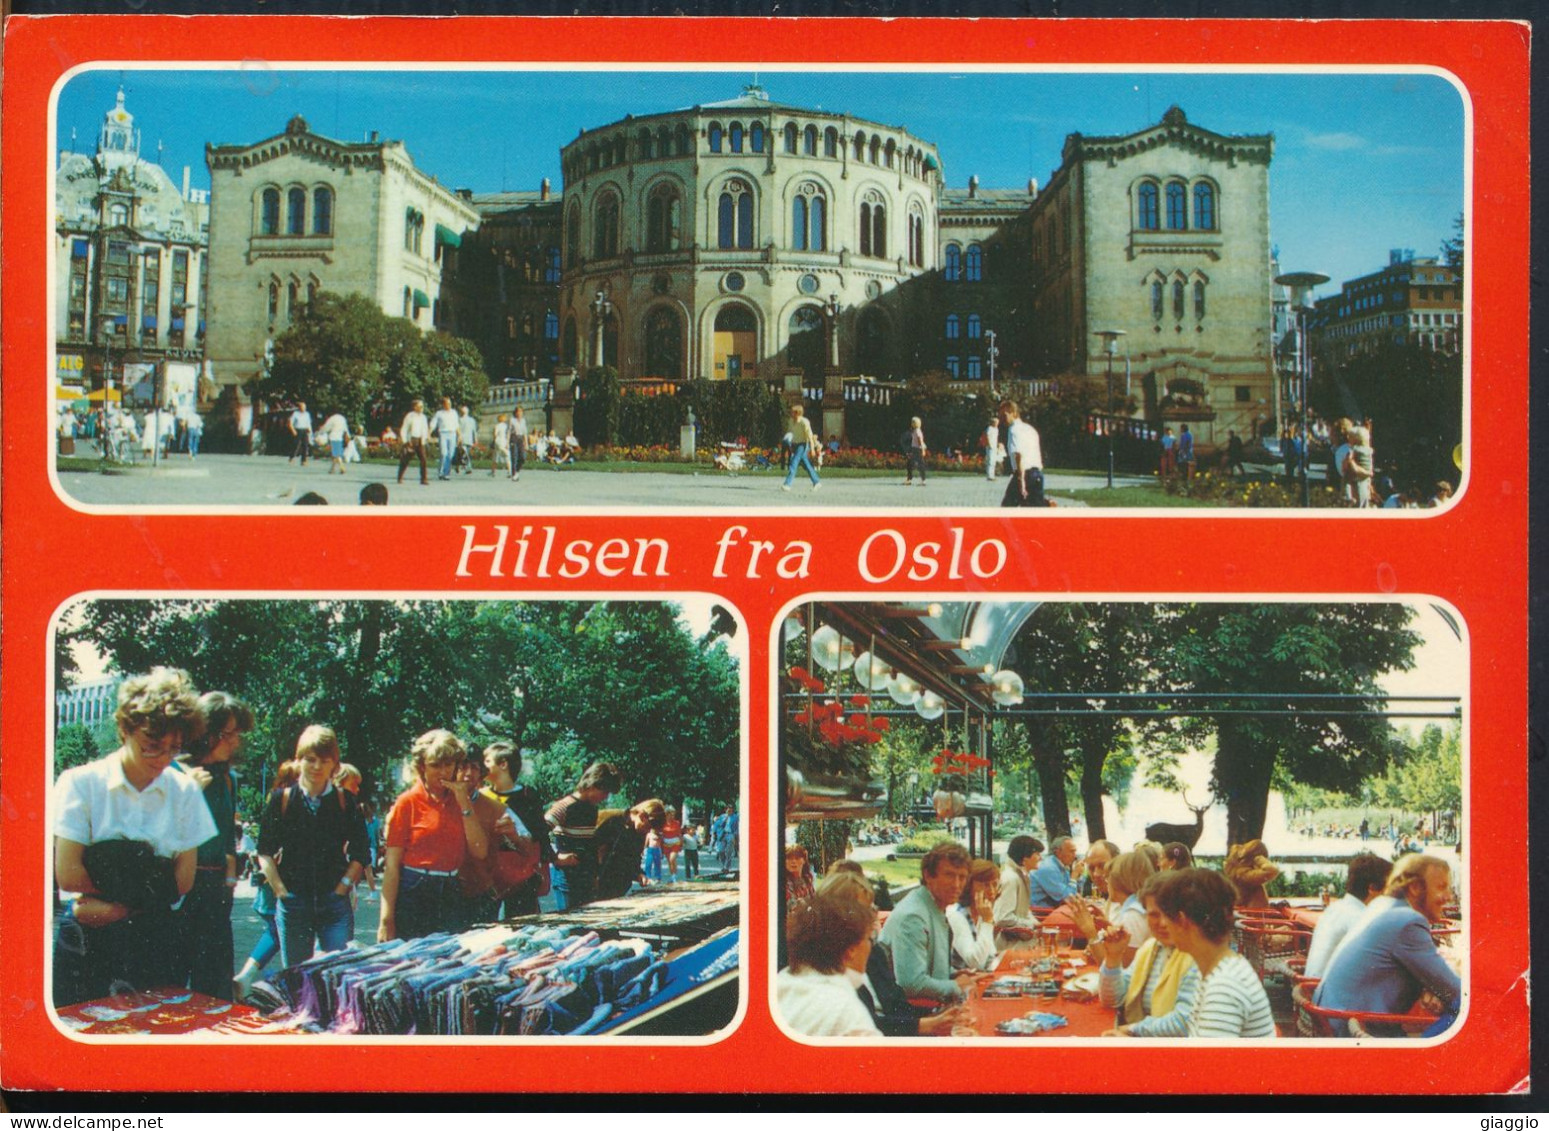 °°° 31010 - NORWAY - HILSEN FRA OSLO - 1982 With Stamps °°° - Norvegia